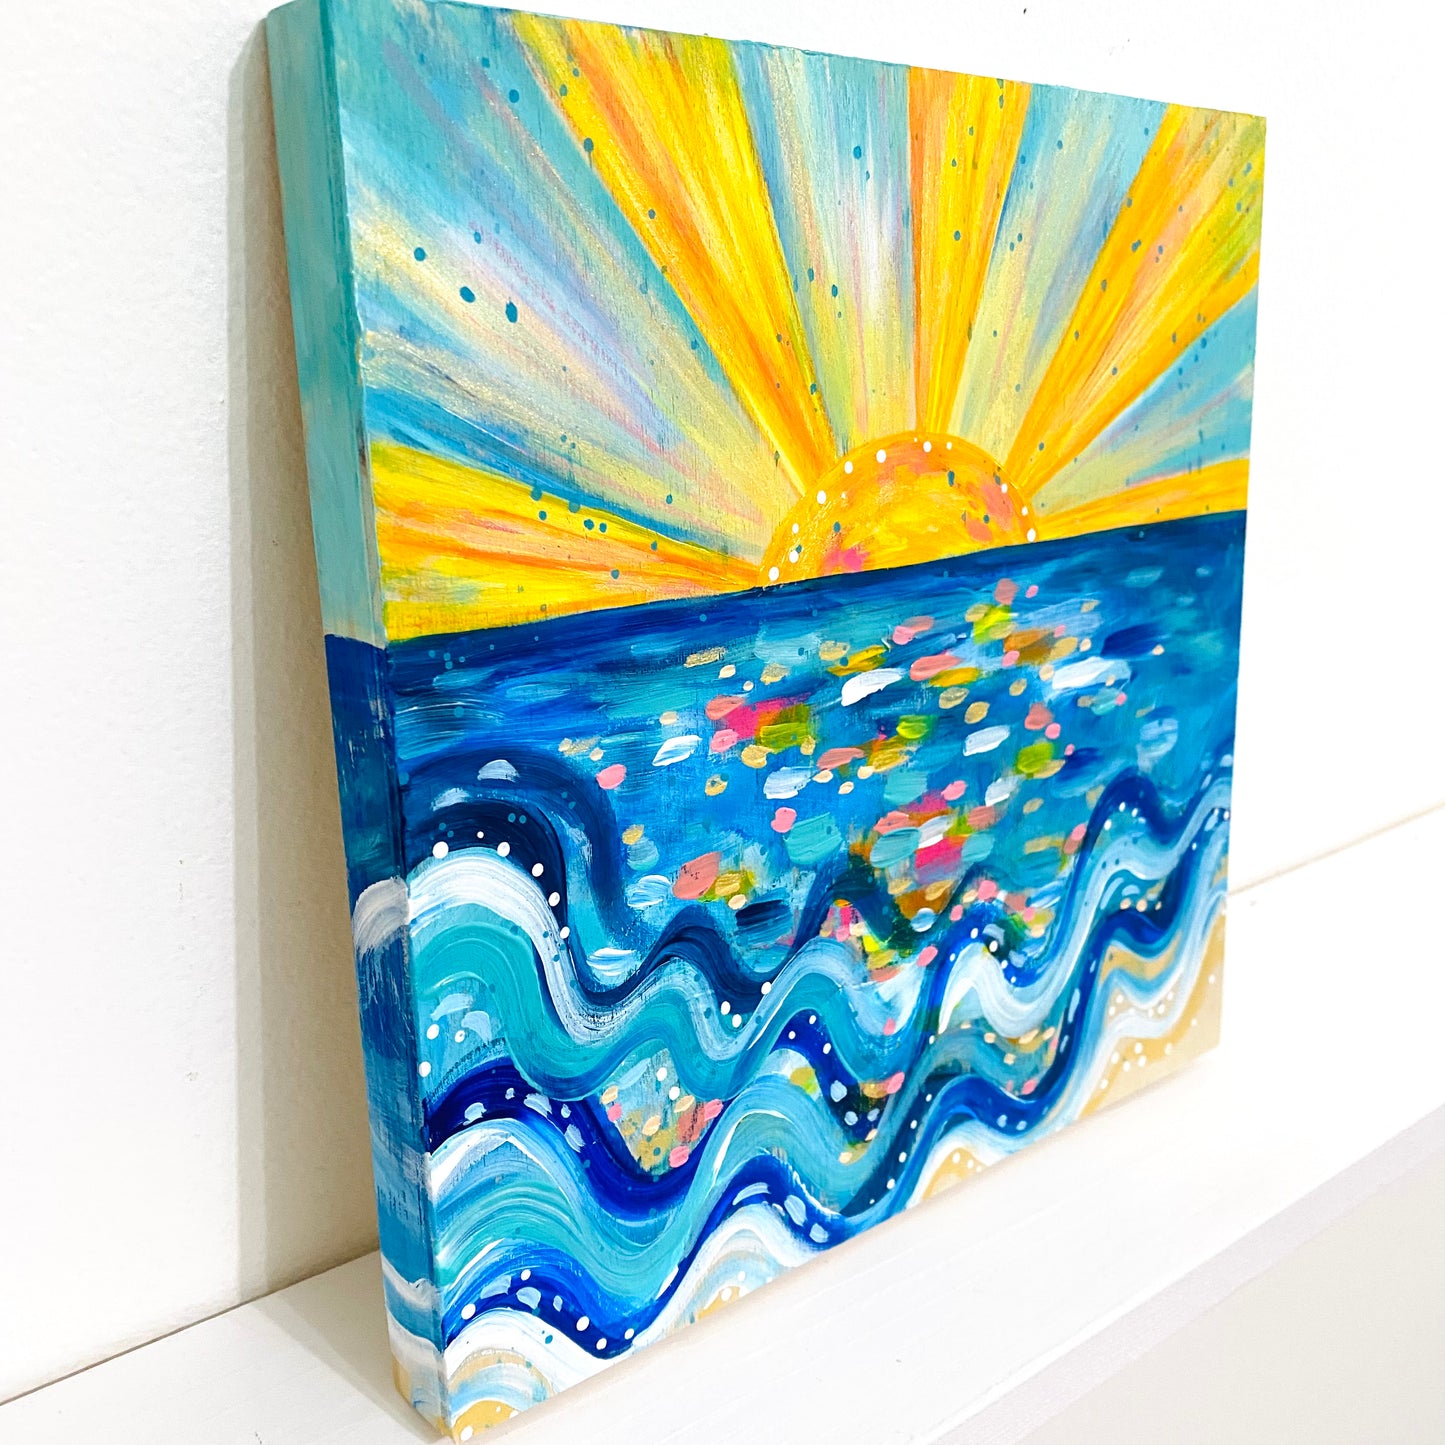 "Stay Golden" 8x8 inch Original Coastal Inspired Painting on Wood Panel with painted sides